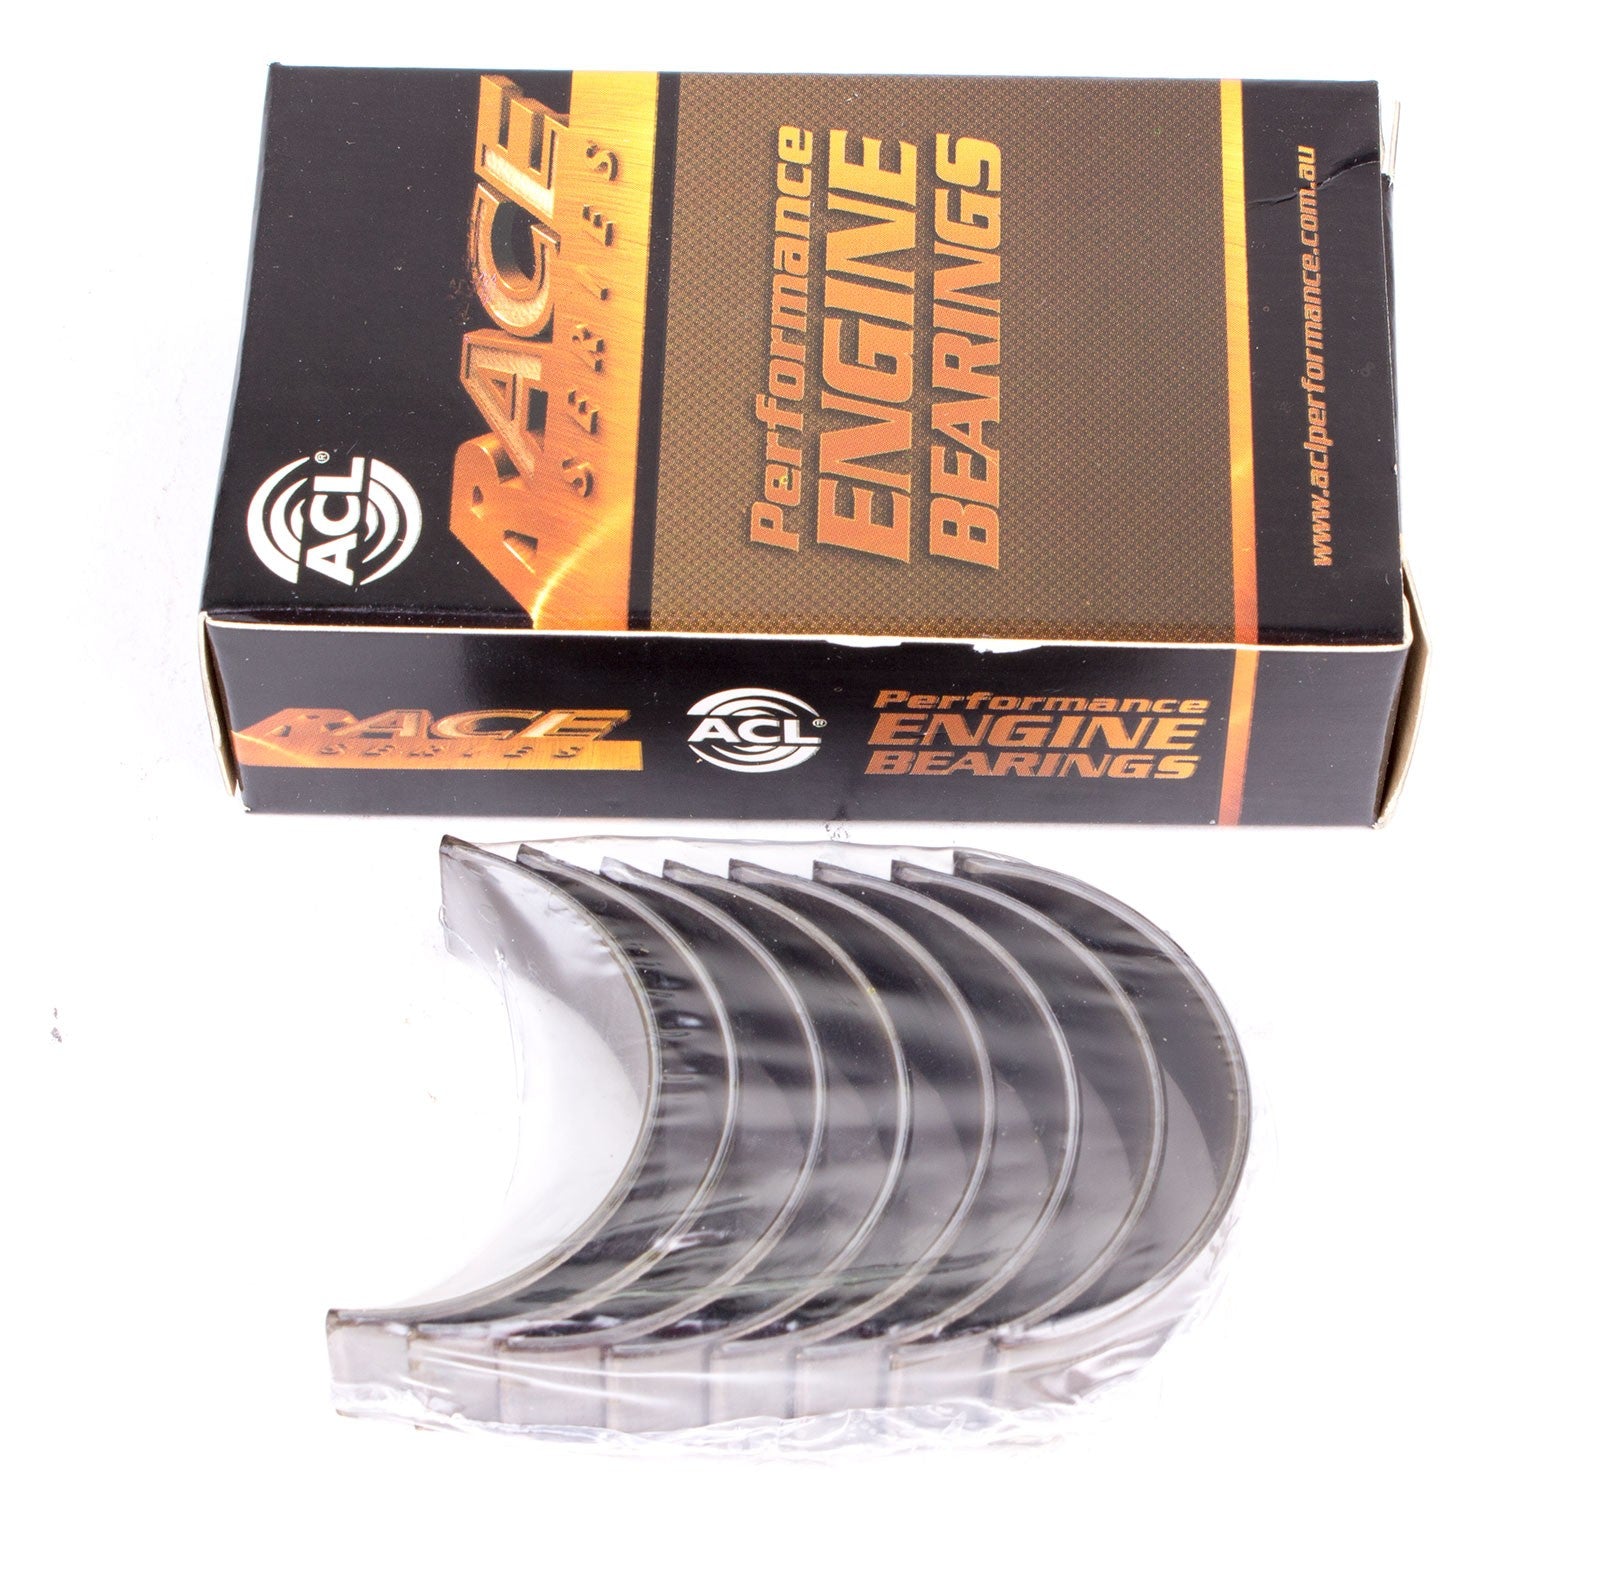 ACL 7M2158H-001 Main bearing set (ACL Race Series) Photo-0 